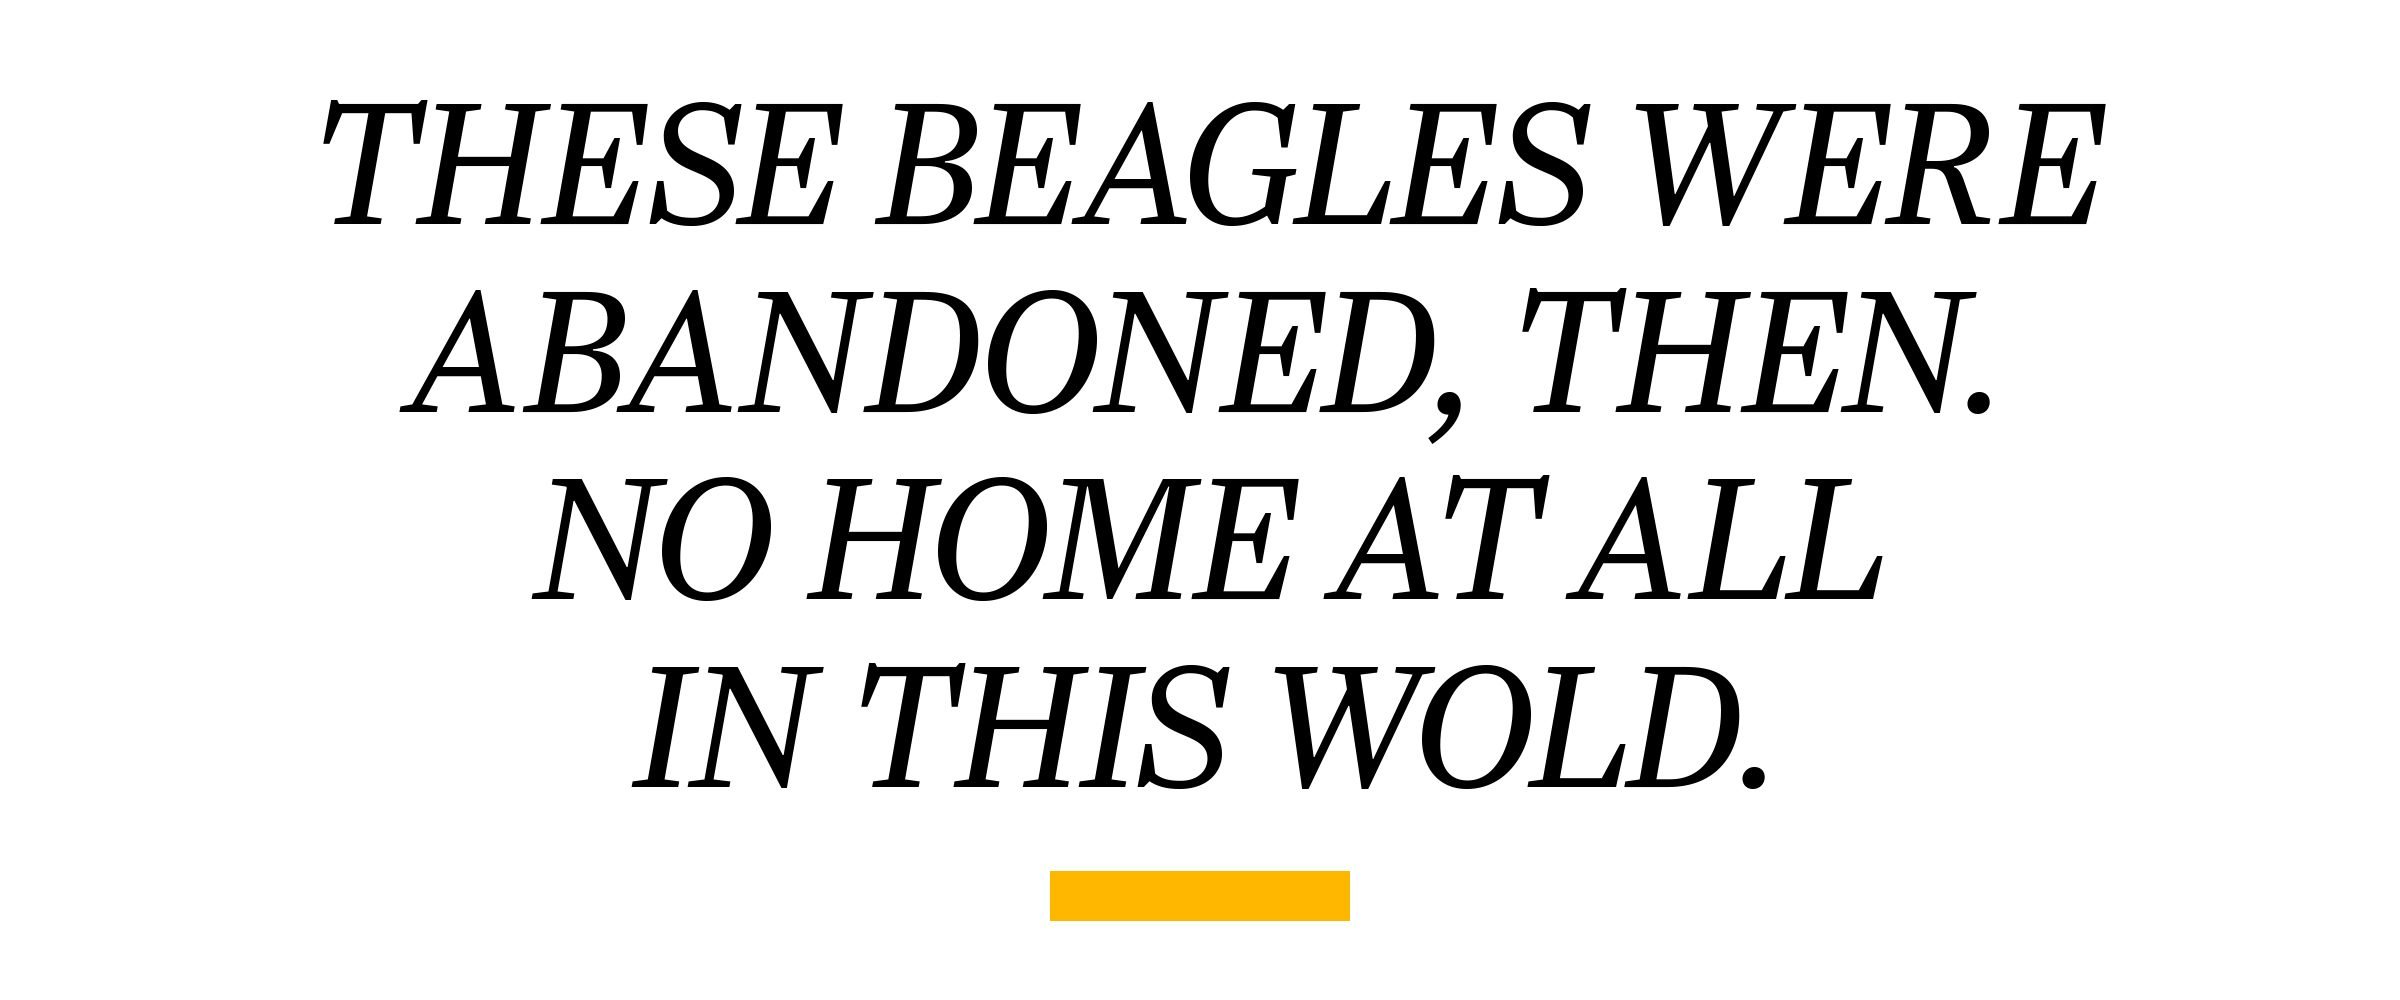 PULL QUOTE: These beagles were abandoned, then. No home at all in this world.